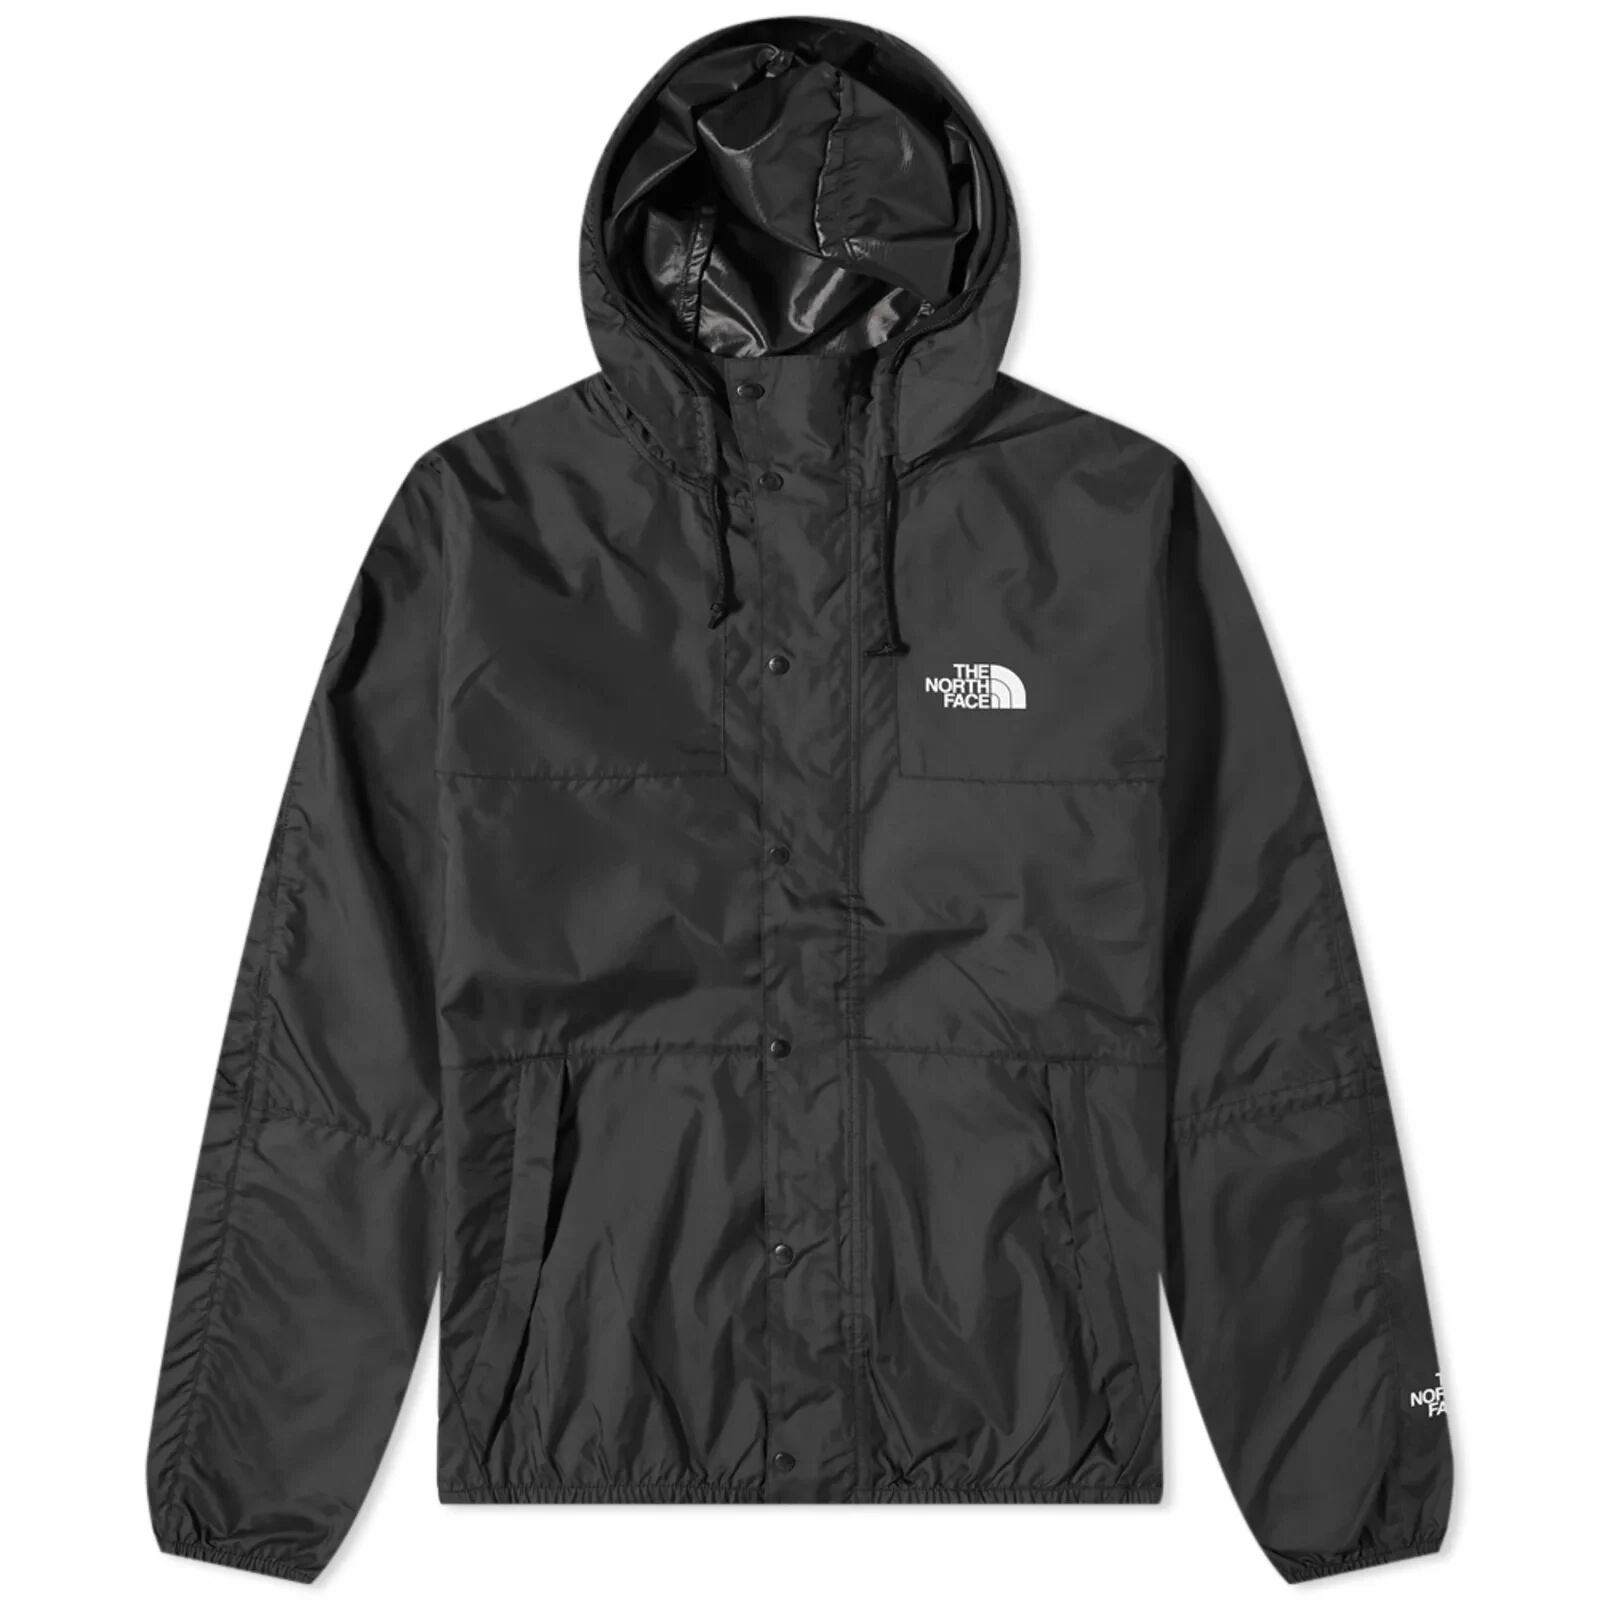 The North Face Men's Seasonal Mountain Jacket in TNF Black, Size X-Small